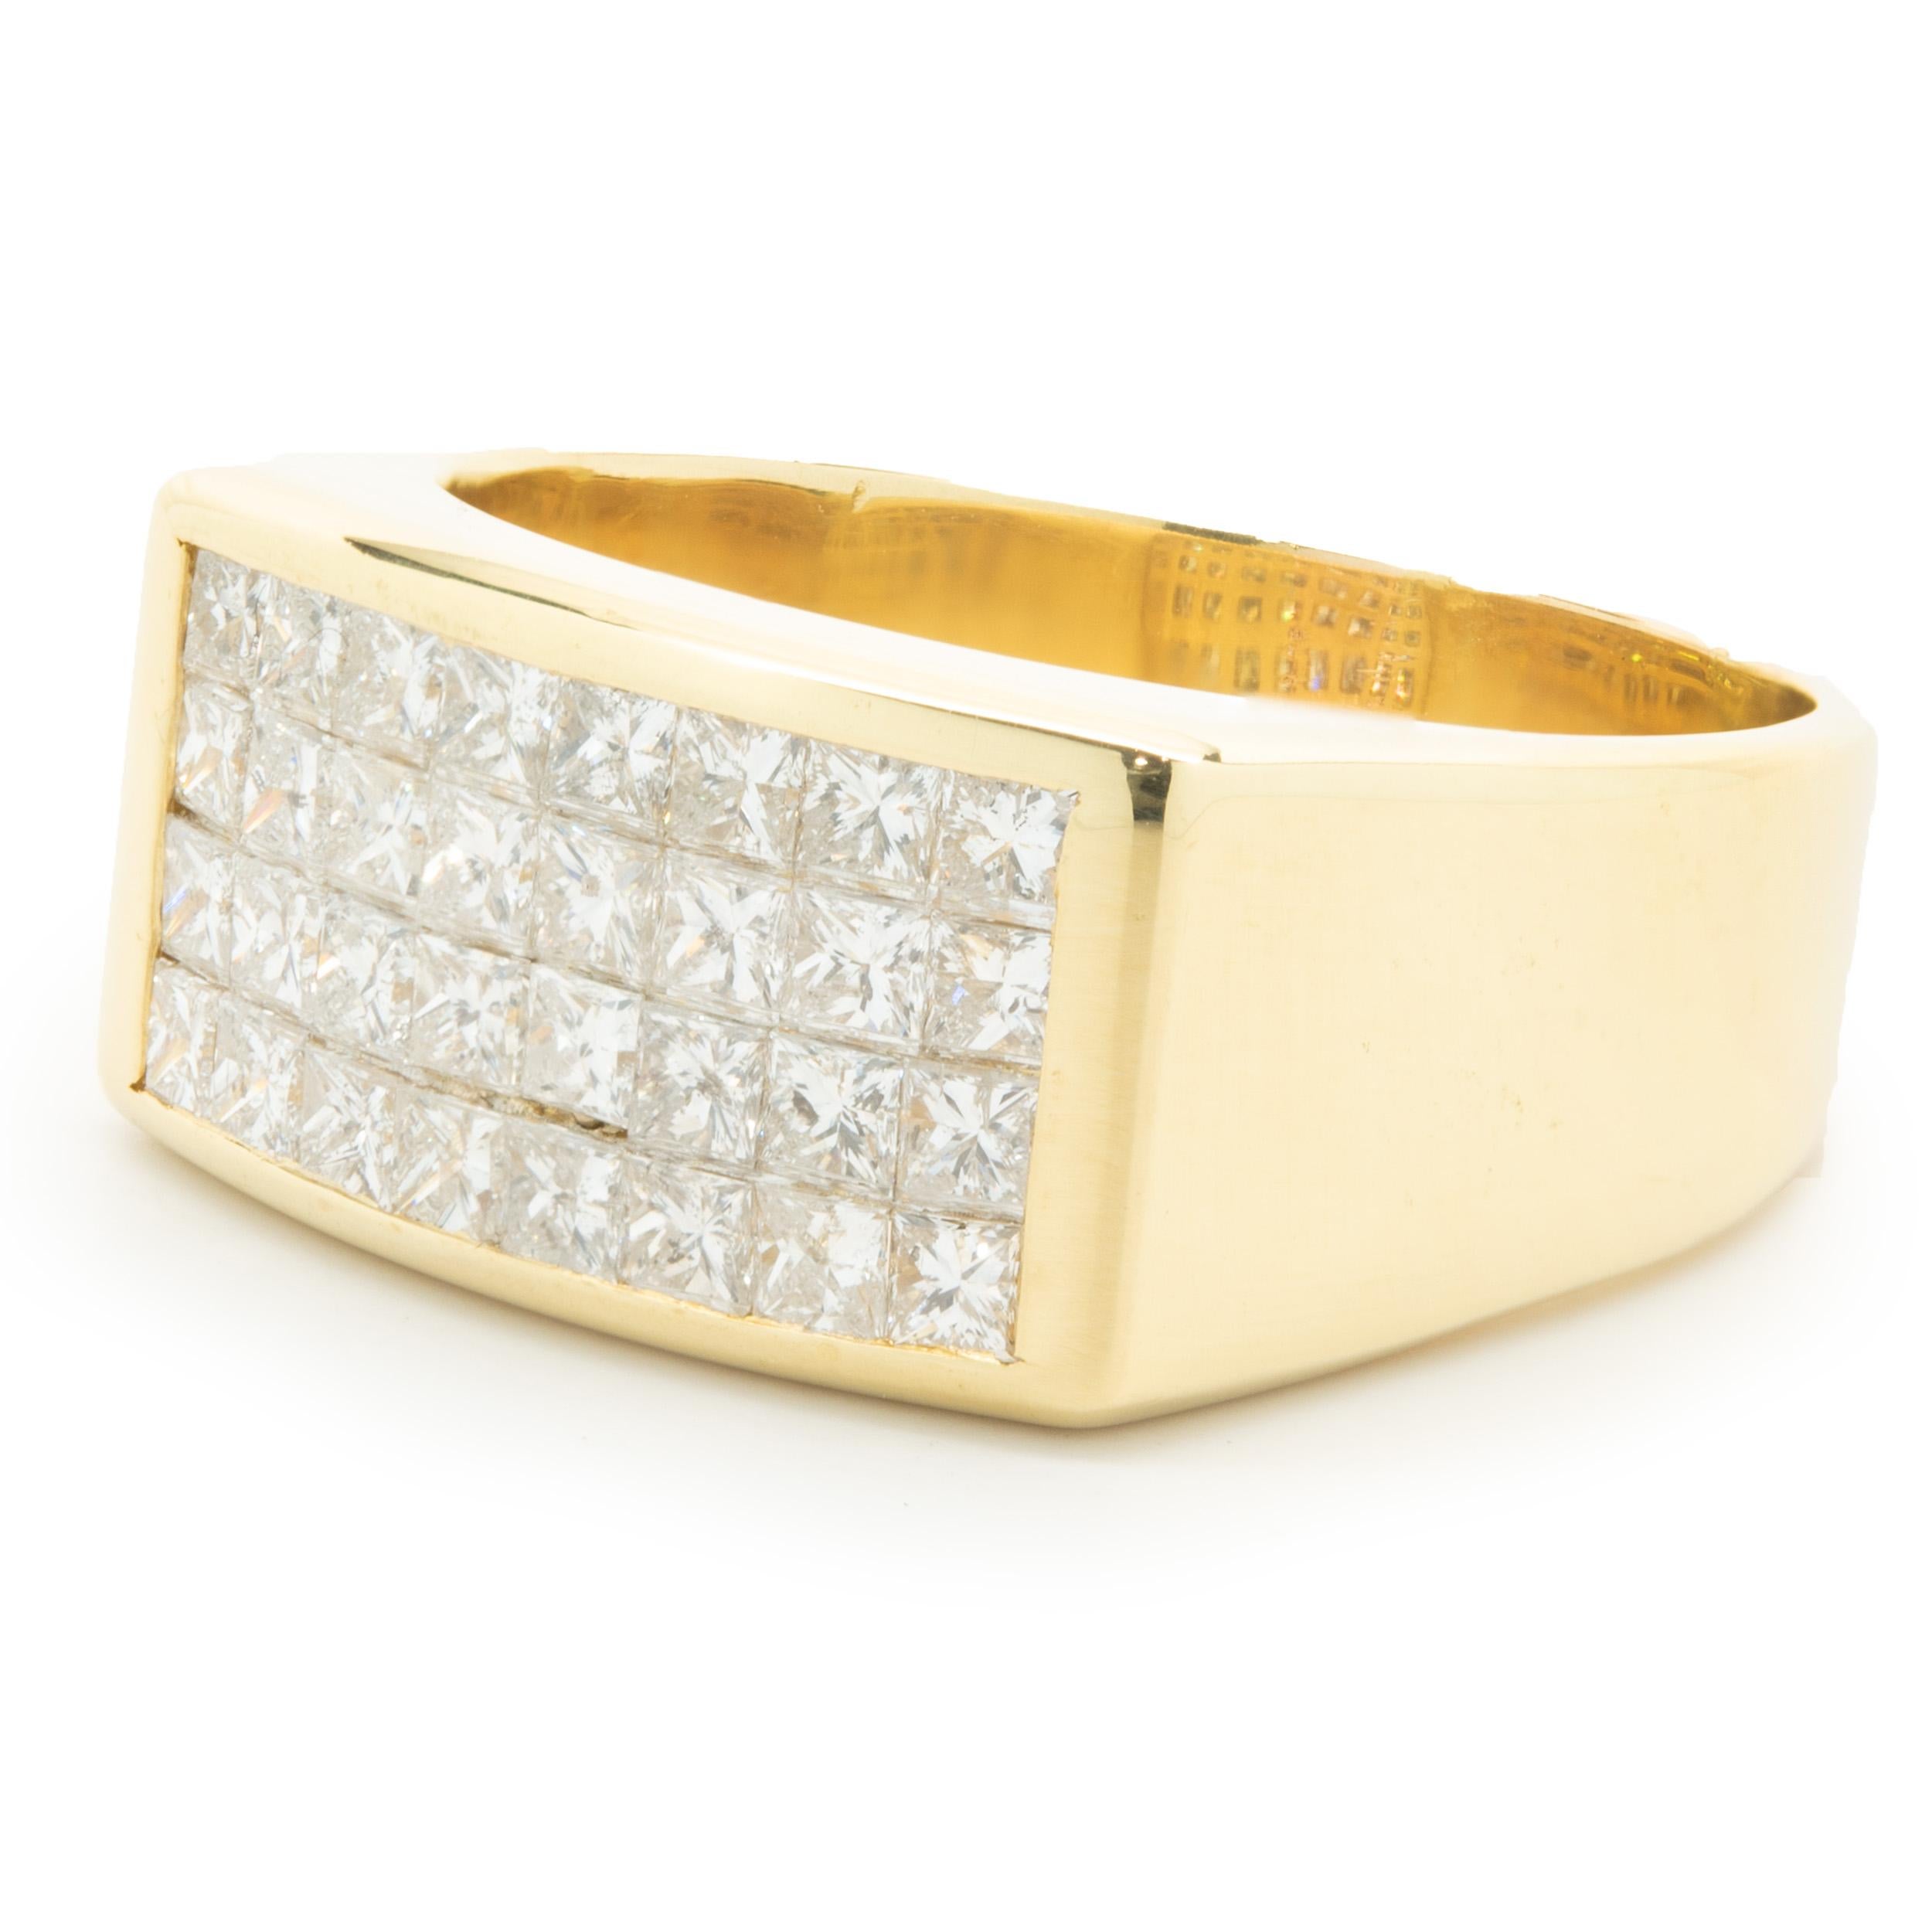 Designer: custom
Material: 18K yellow gold
Diamond: 32 princess cut = 2.90cttw
Color: G
Clarity: SI2
Ring size: 11 (please allow two additional shipping days for sizing requests)
Weight:  17.21 grams